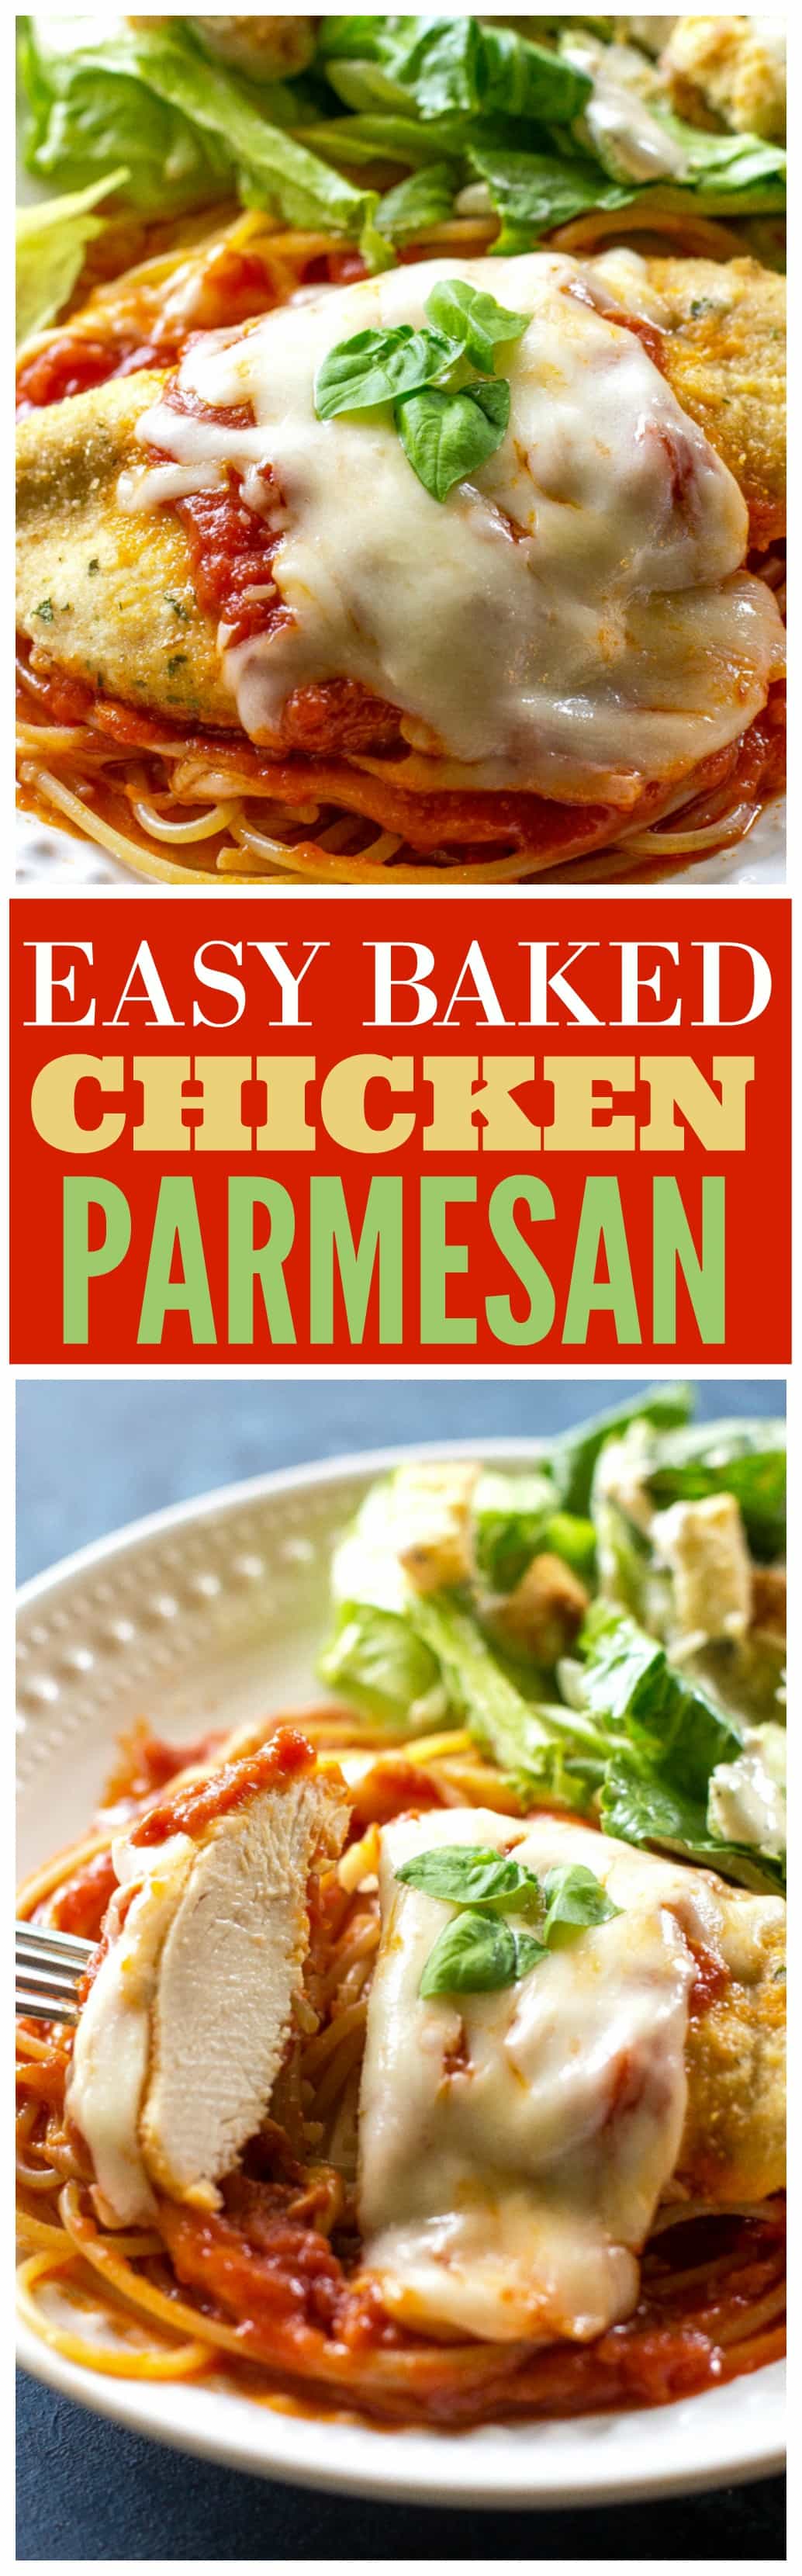 Easy Baked Chicken Parmesan - my go-to easy Italian dinner when I don't have anything planned. #easy #baked #chicken #parmesan #dinner #recipe